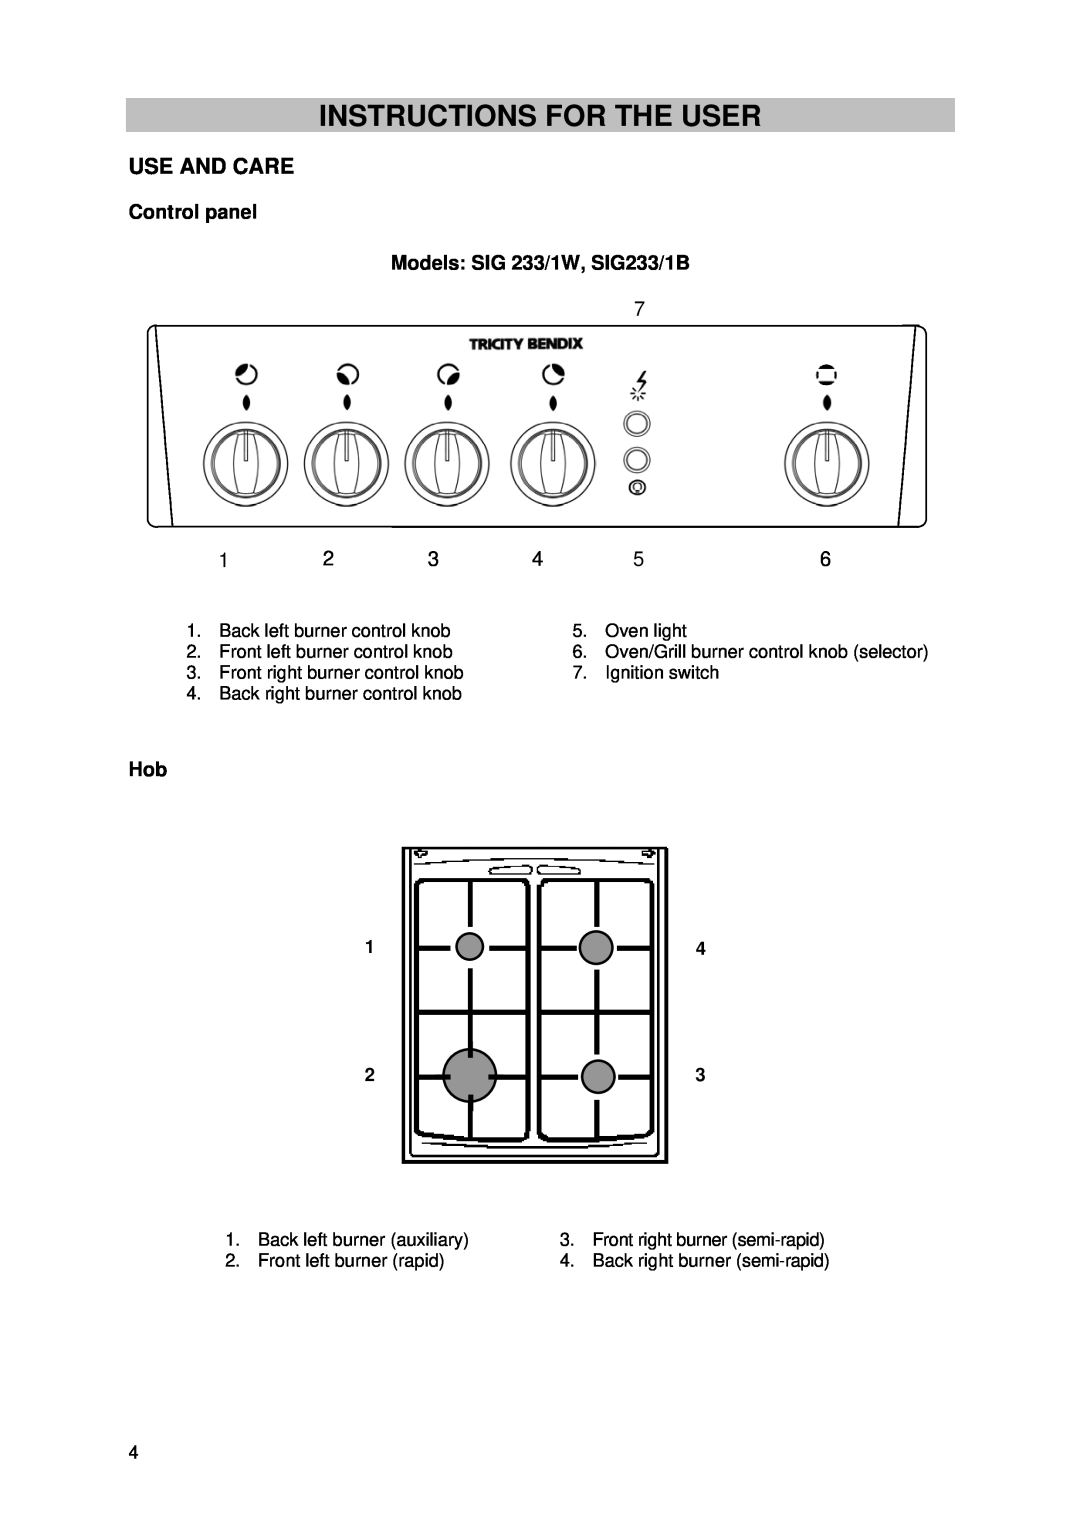 Tricity Bendix Instructions For The User, Use And Care, Control panel Models SIG 233/1W, SIG233/1B 